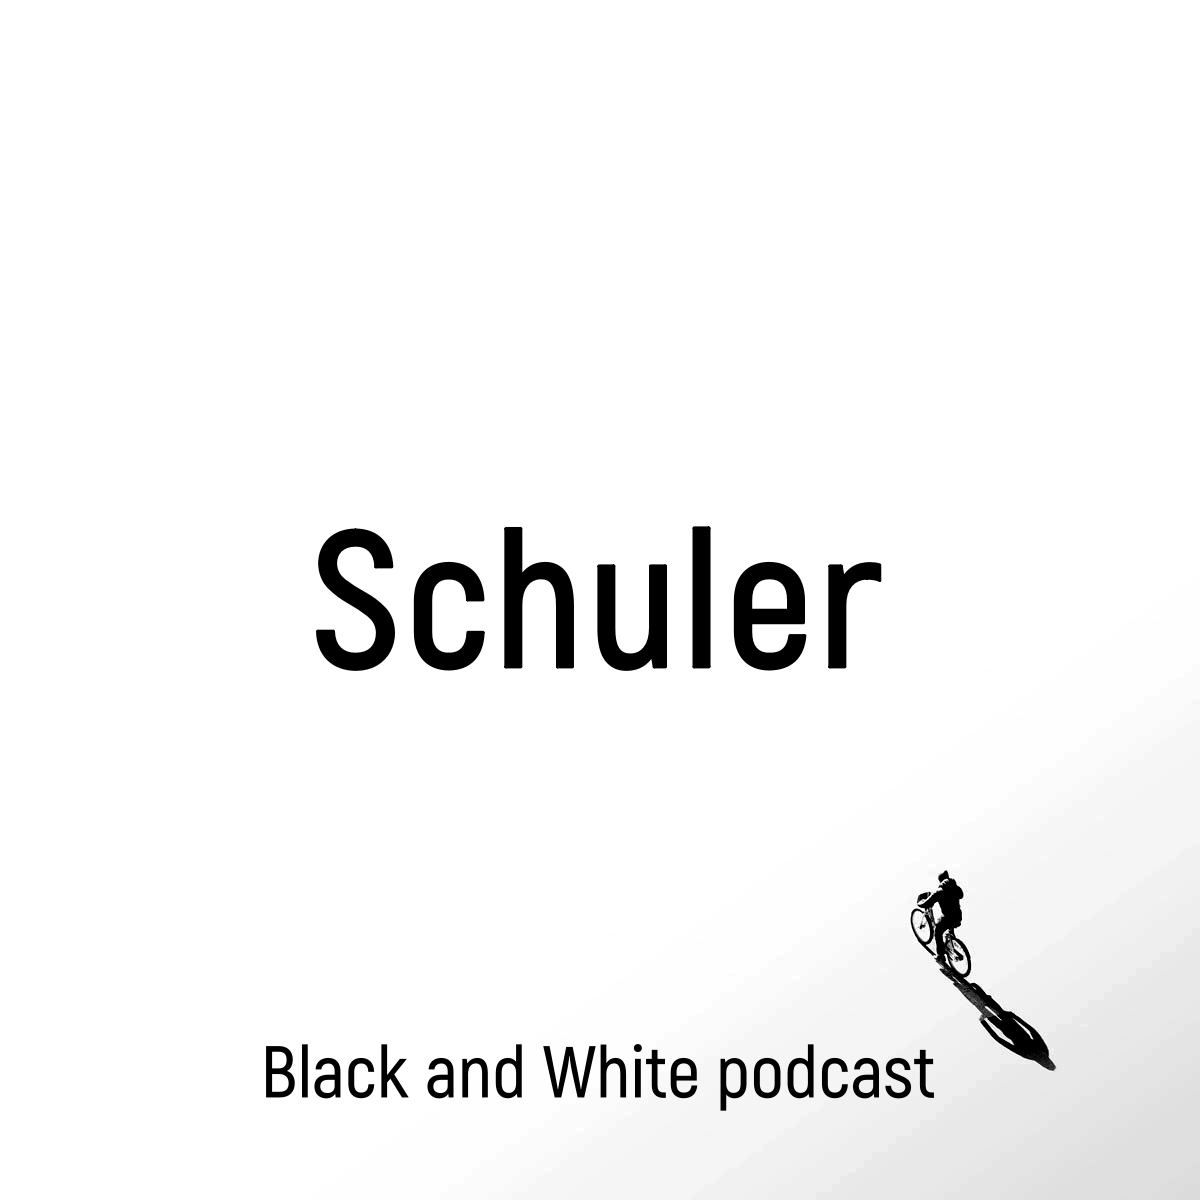 Black and White MD podcast by Schuler